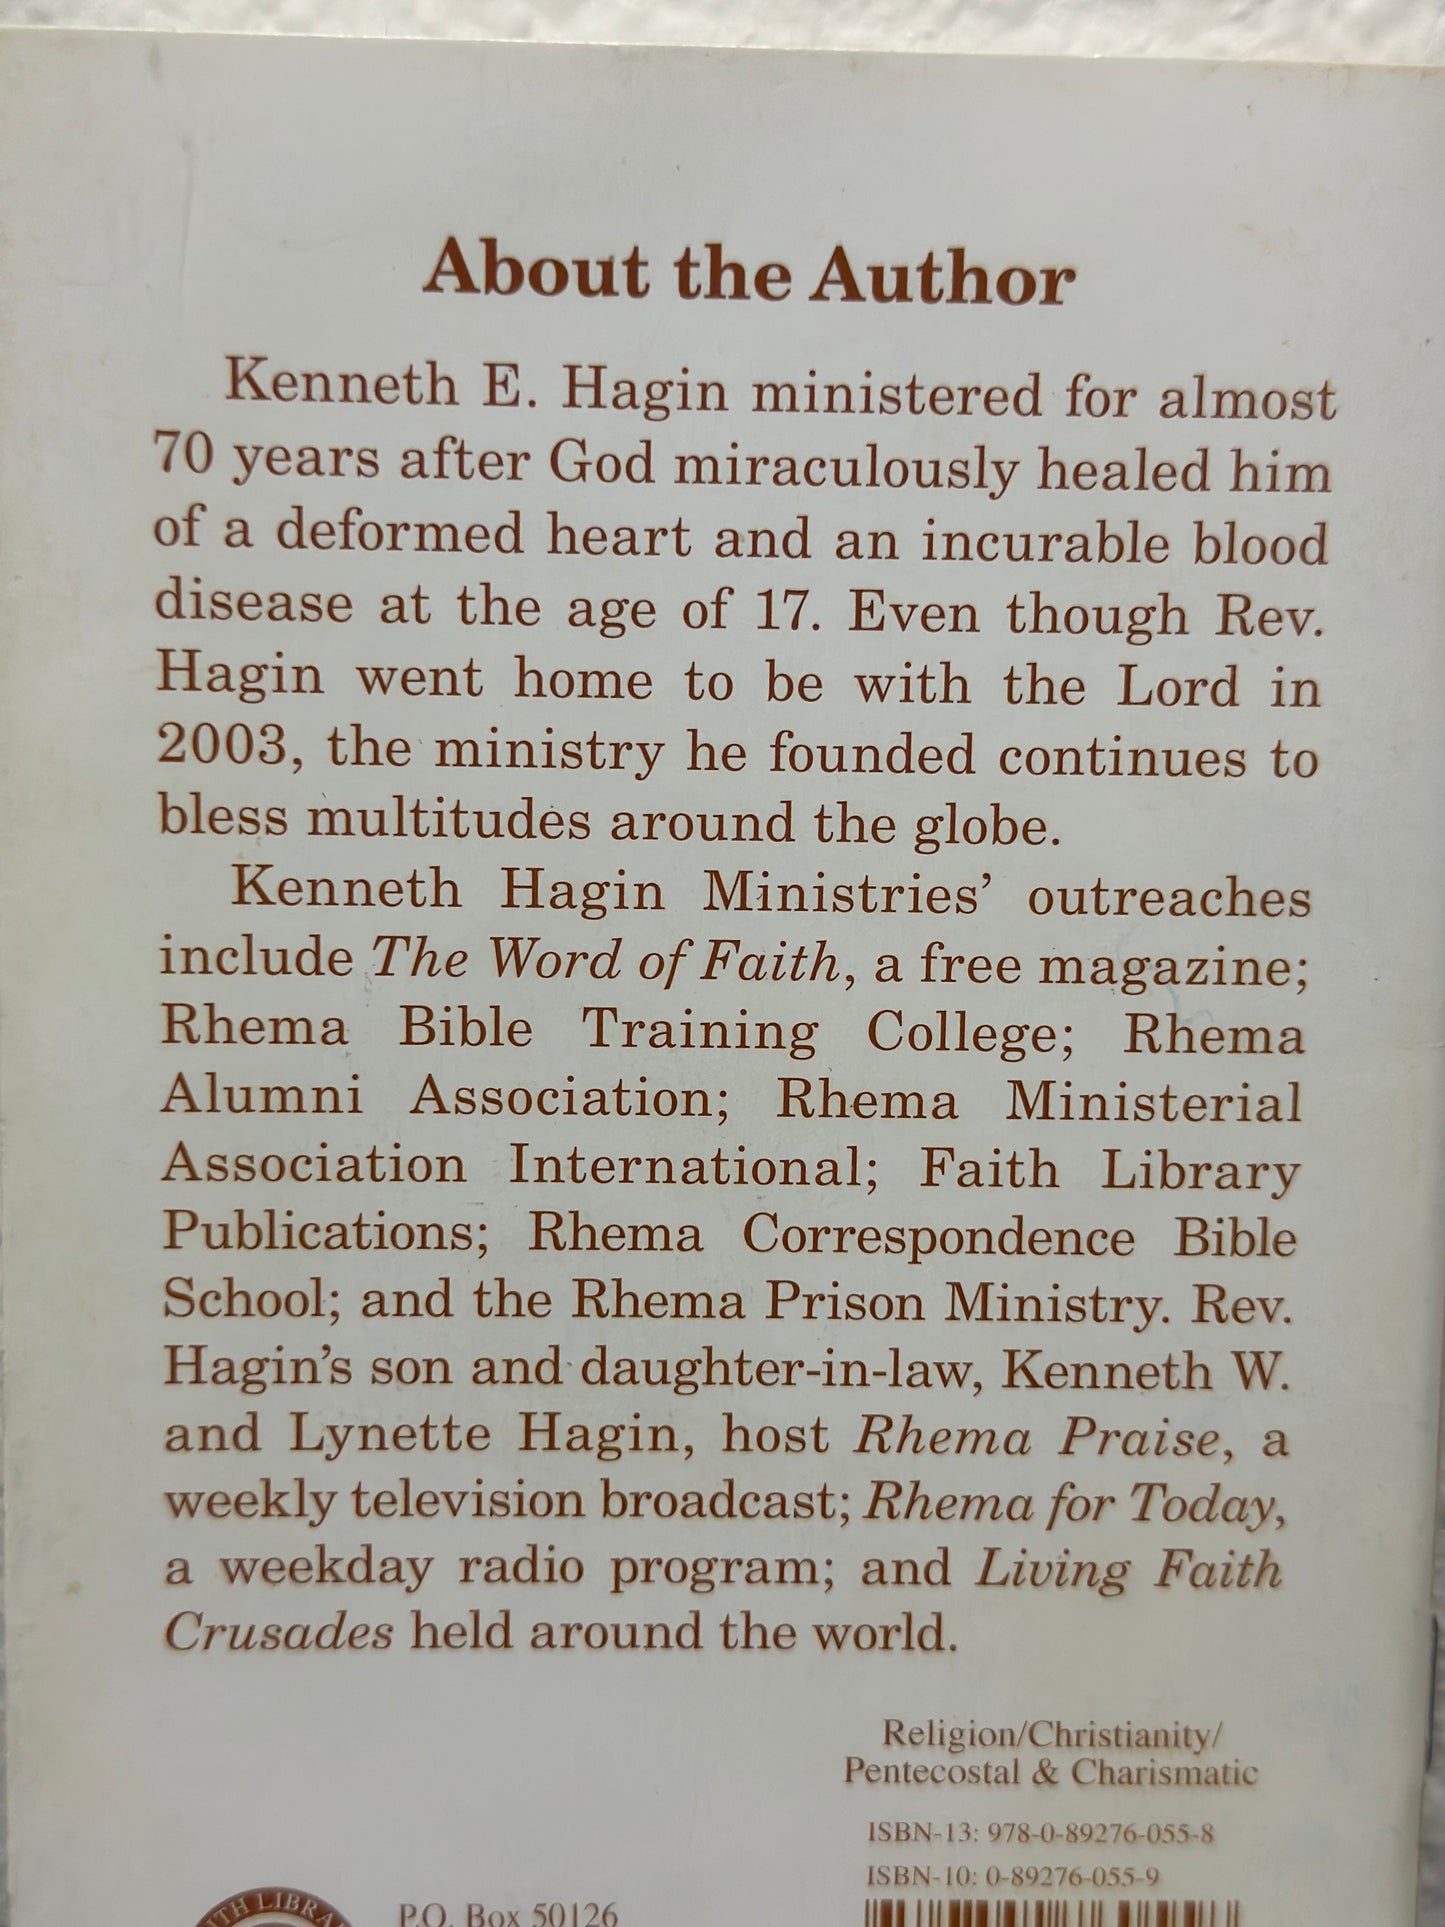 How To Write Your Own Ticket With God By Kenneth E Hagin (Booklet)